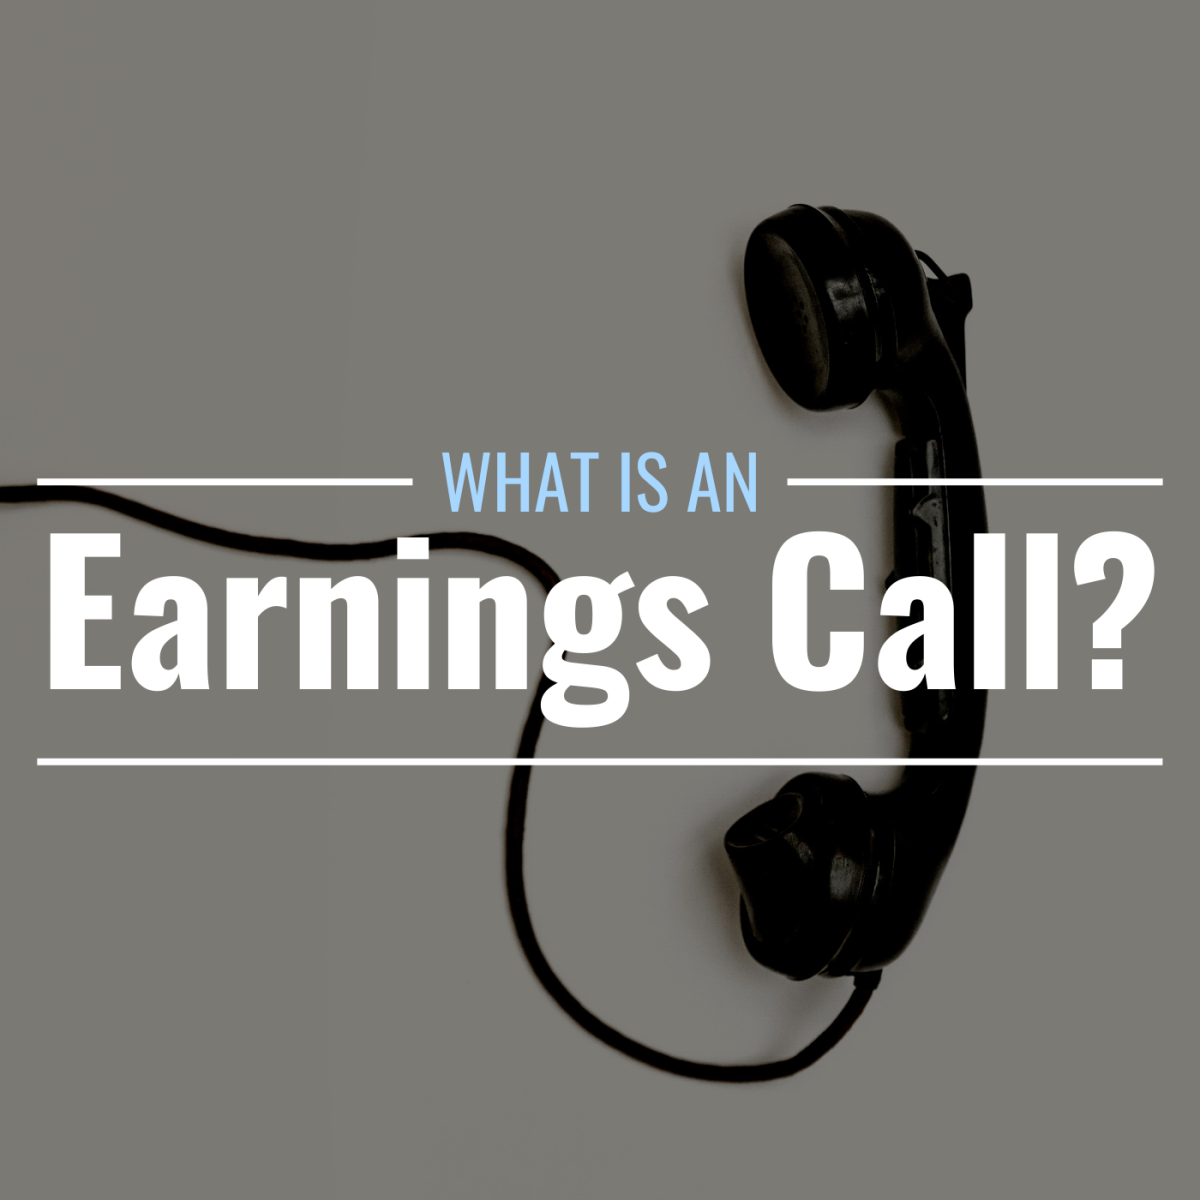 Darkened photo of an old-fashioned, black, corded telephone headset with text overlay that reads "What Is an Earnings Call?"